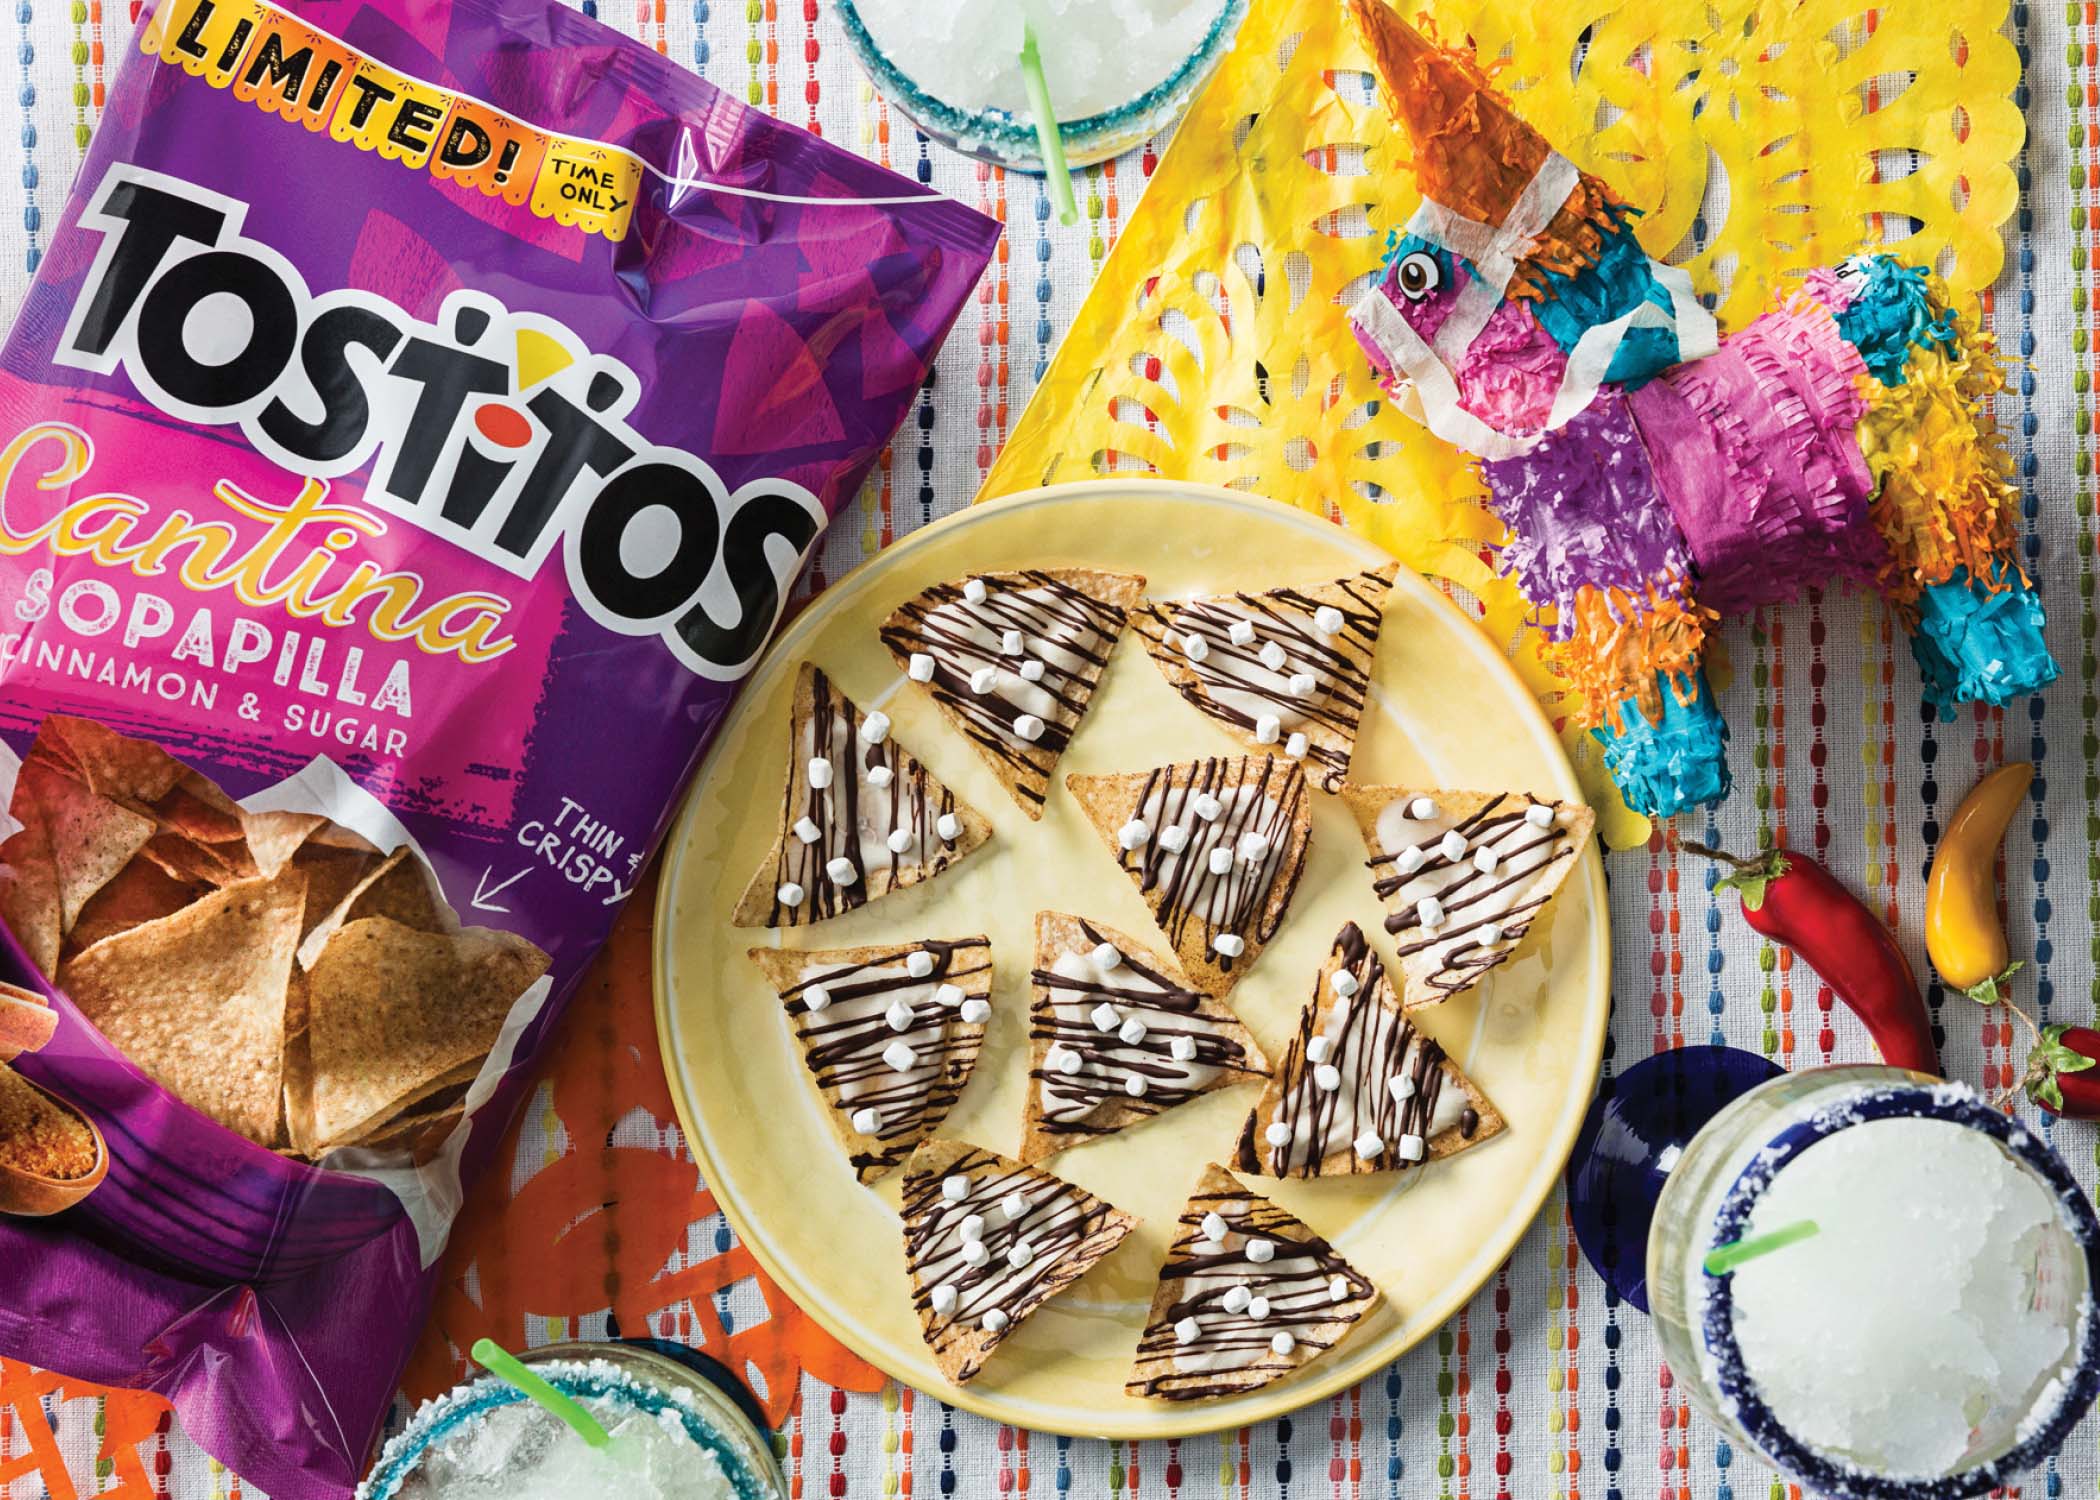 Featuring limited-time only Tostitos Cantina Sopapilla Cinnamon & Sugar tortilla chips, this recipe for Mexican Hot Chocolate Chips will make your party end on a sweet note.